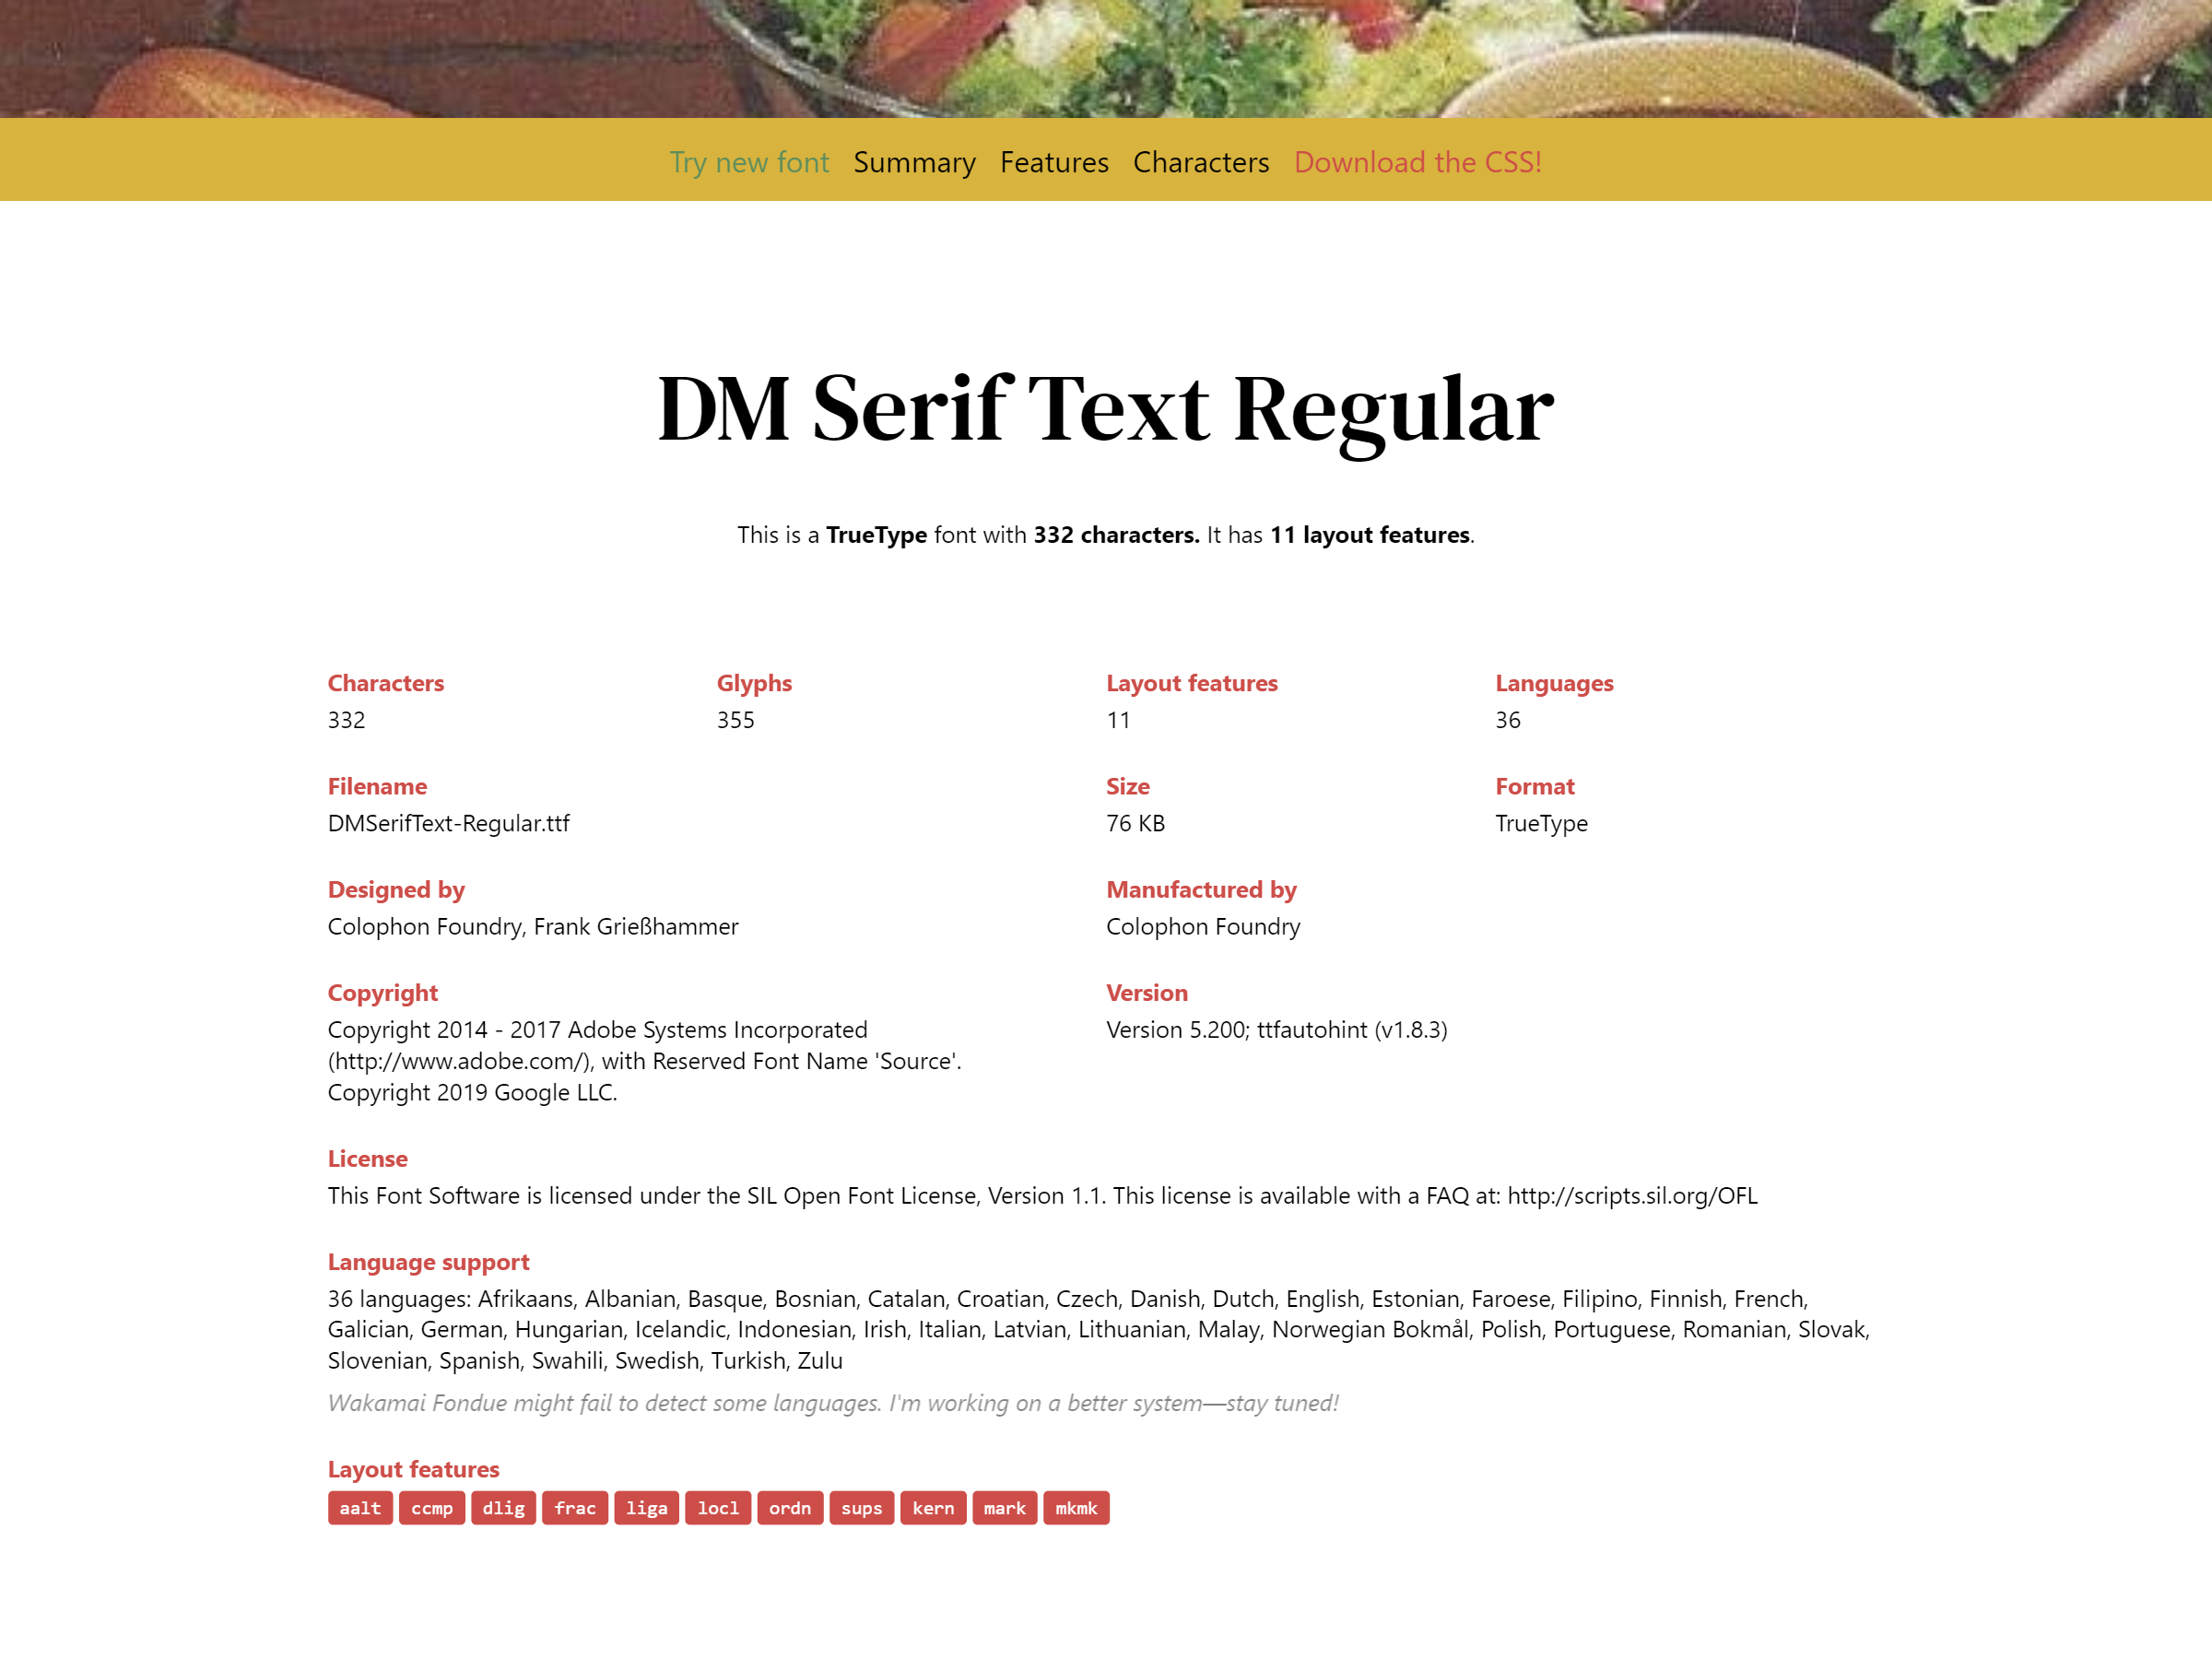 Details of DM Serif Text after uploading the font to Wakamai Fondue